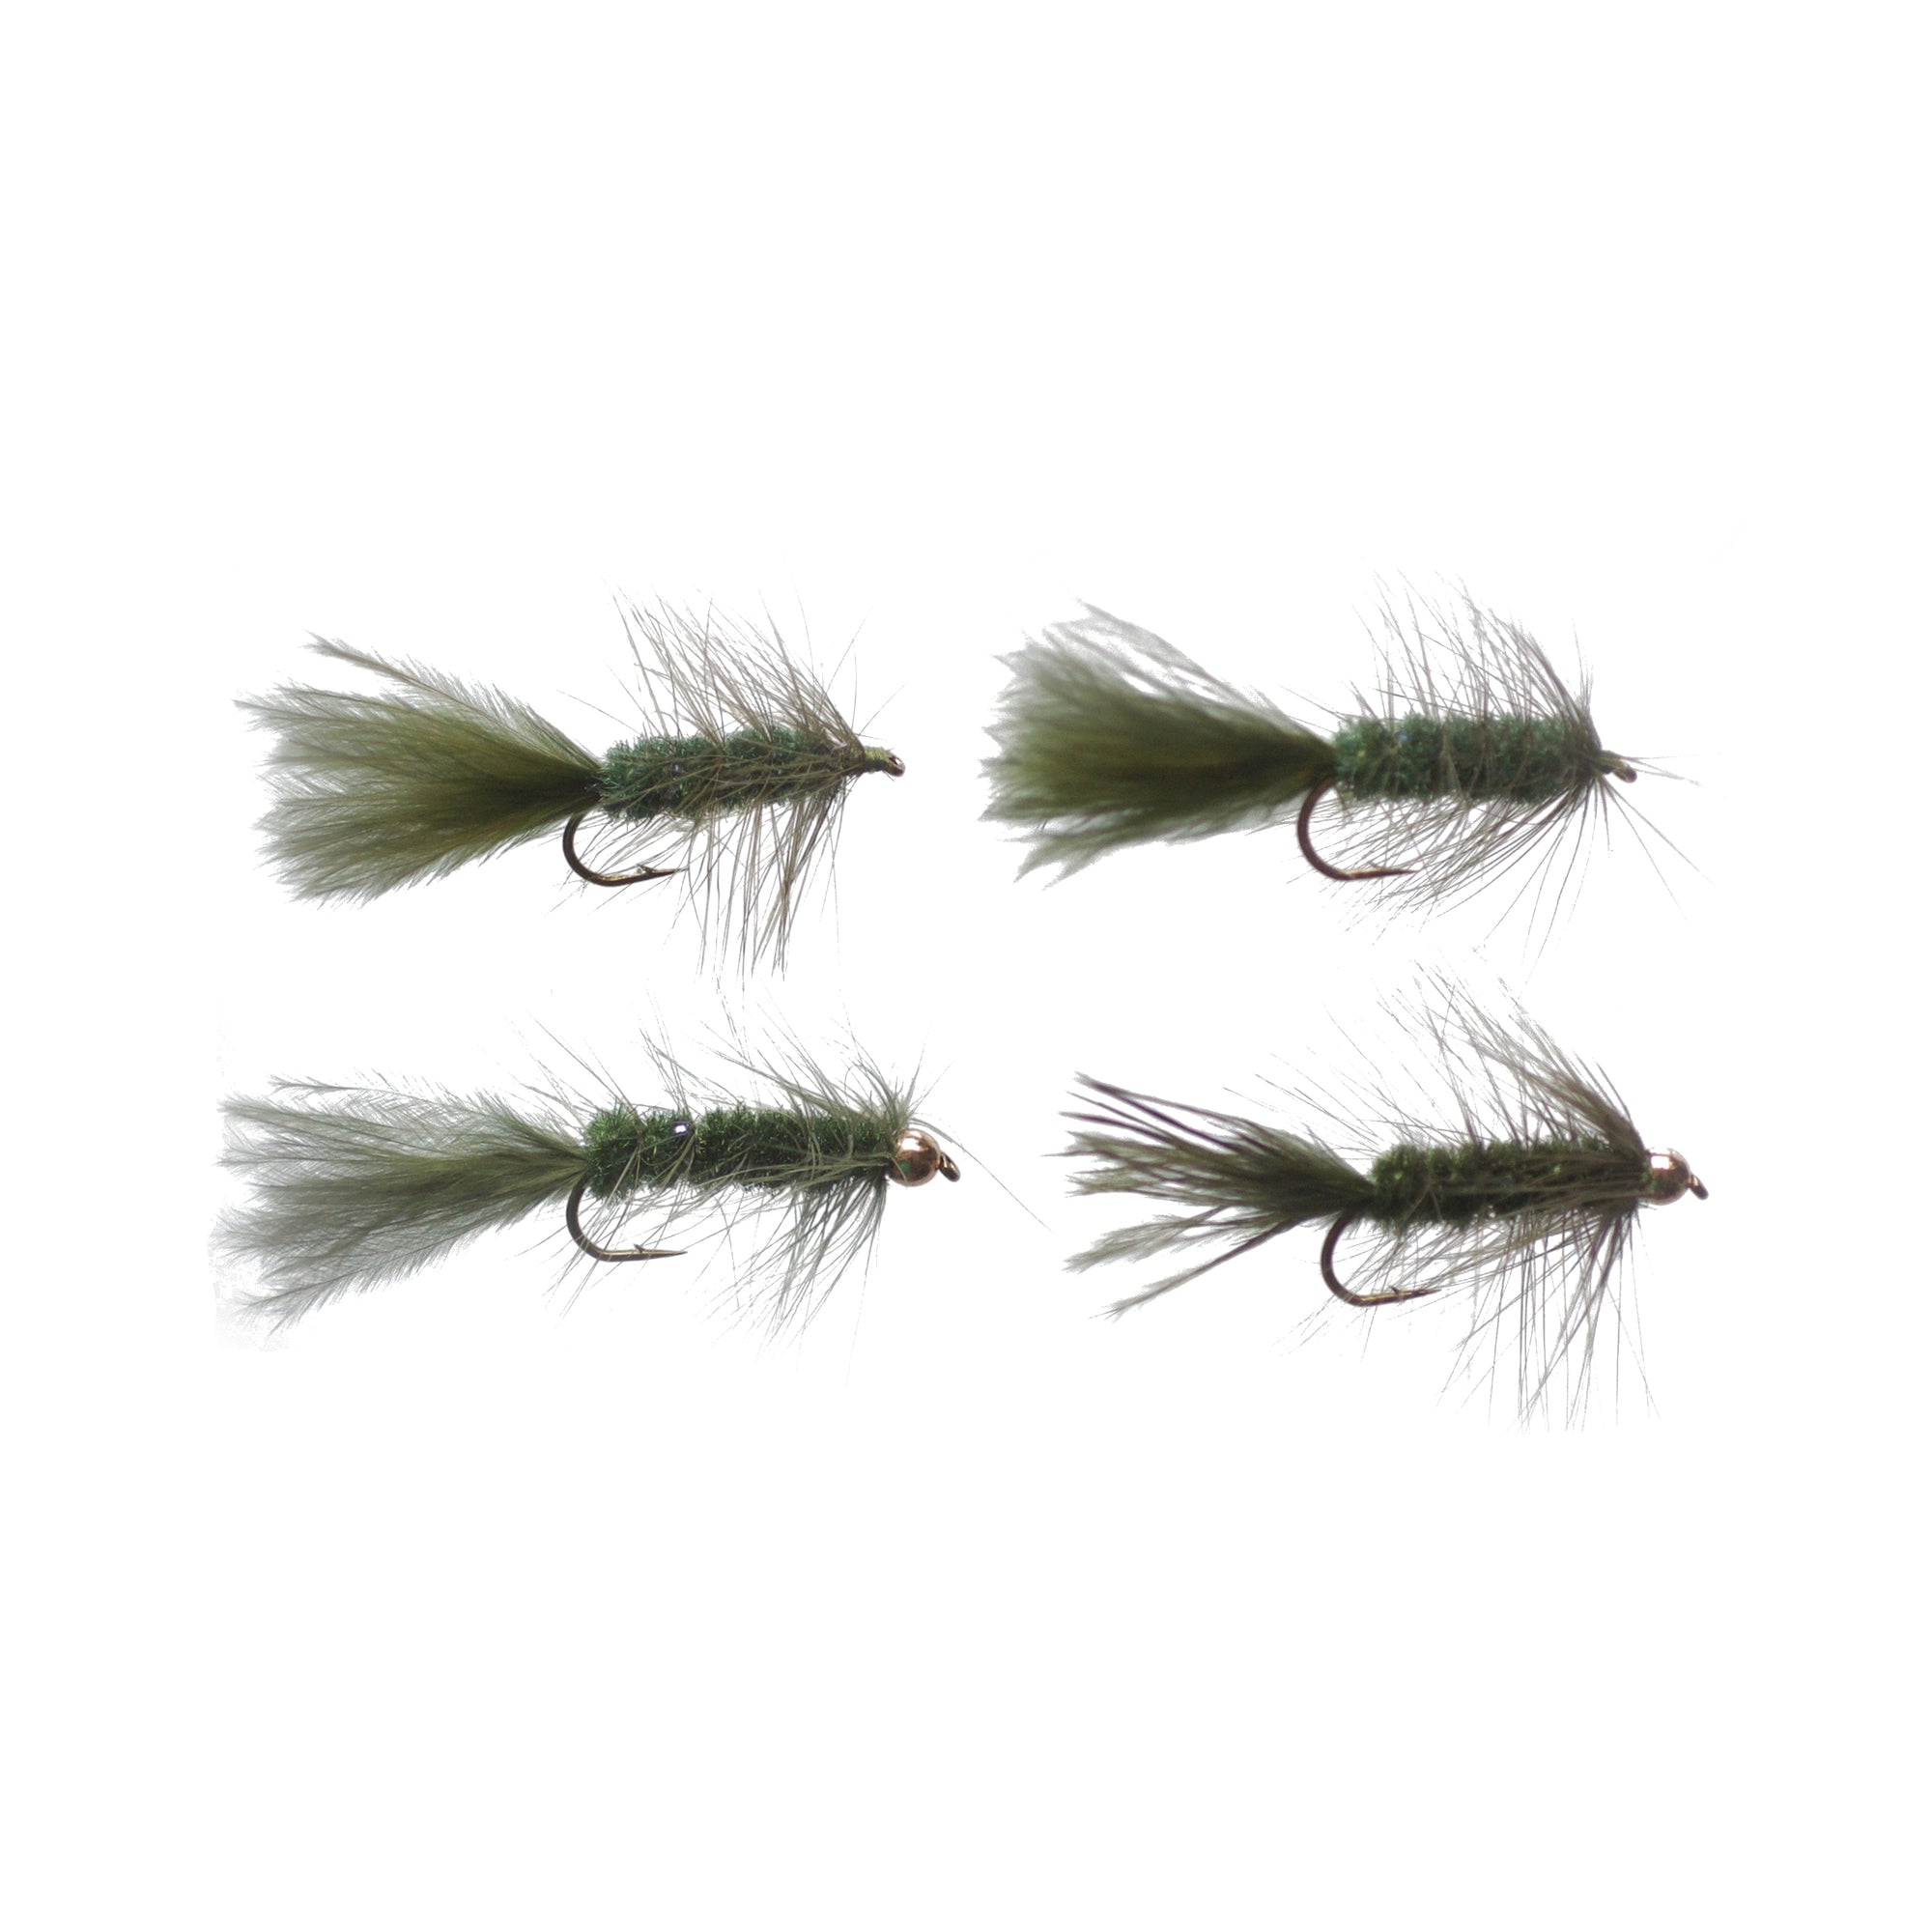 Cortland Fairplay Midge/Scud Nymph Fly Assortment, Size 16, 4 Pack, 709300